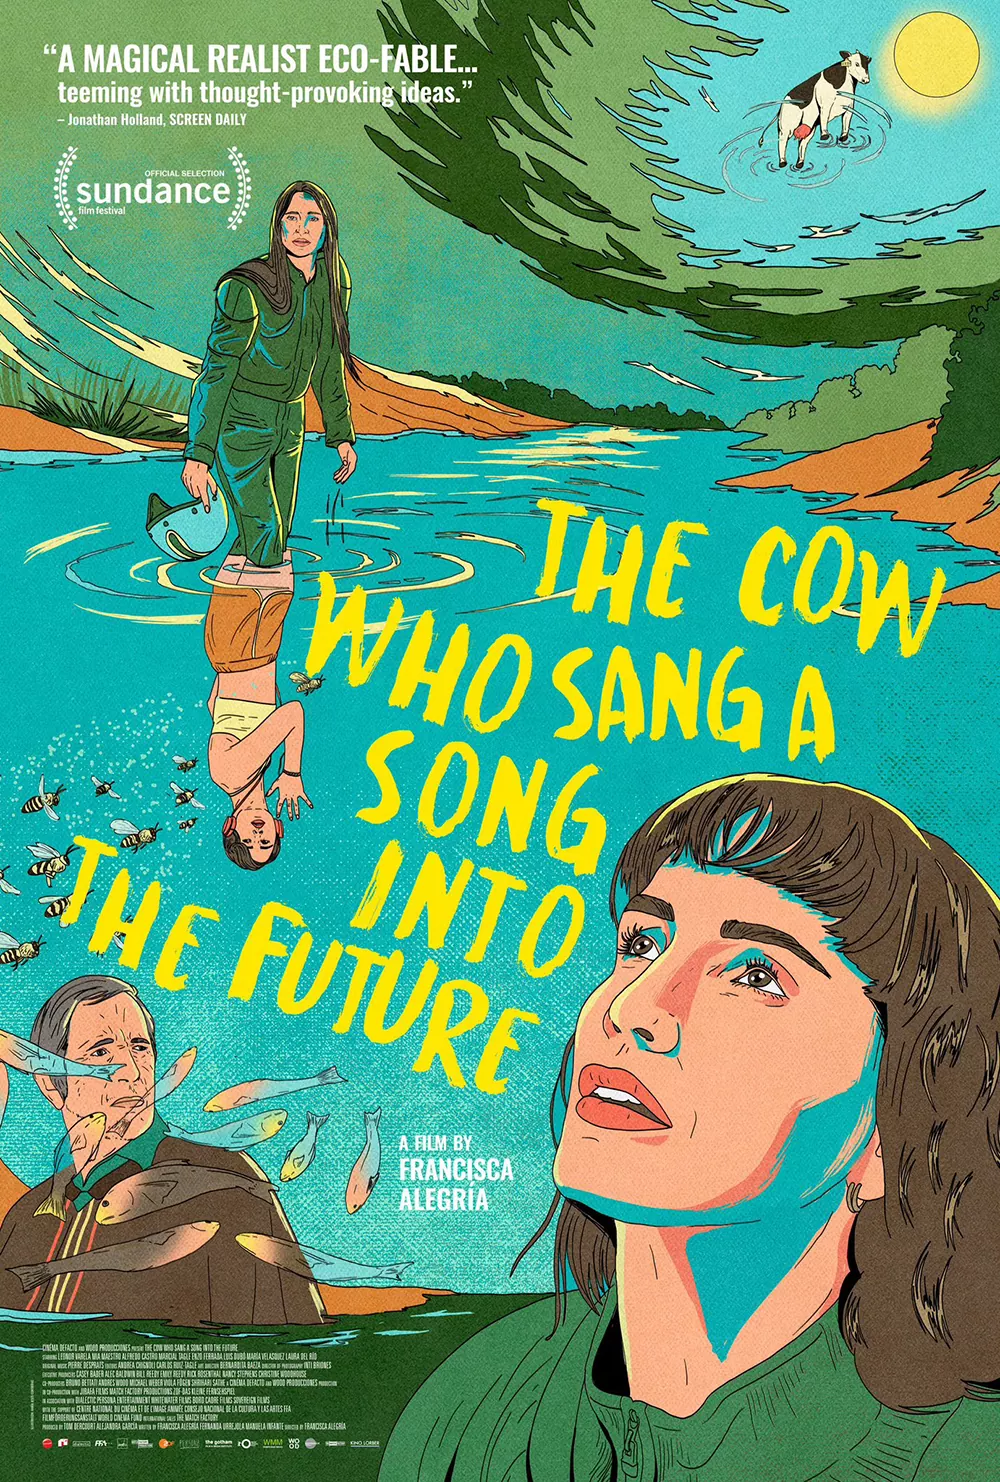 Trailer Από Το "The Cow Who Sang a Song Into the Future"